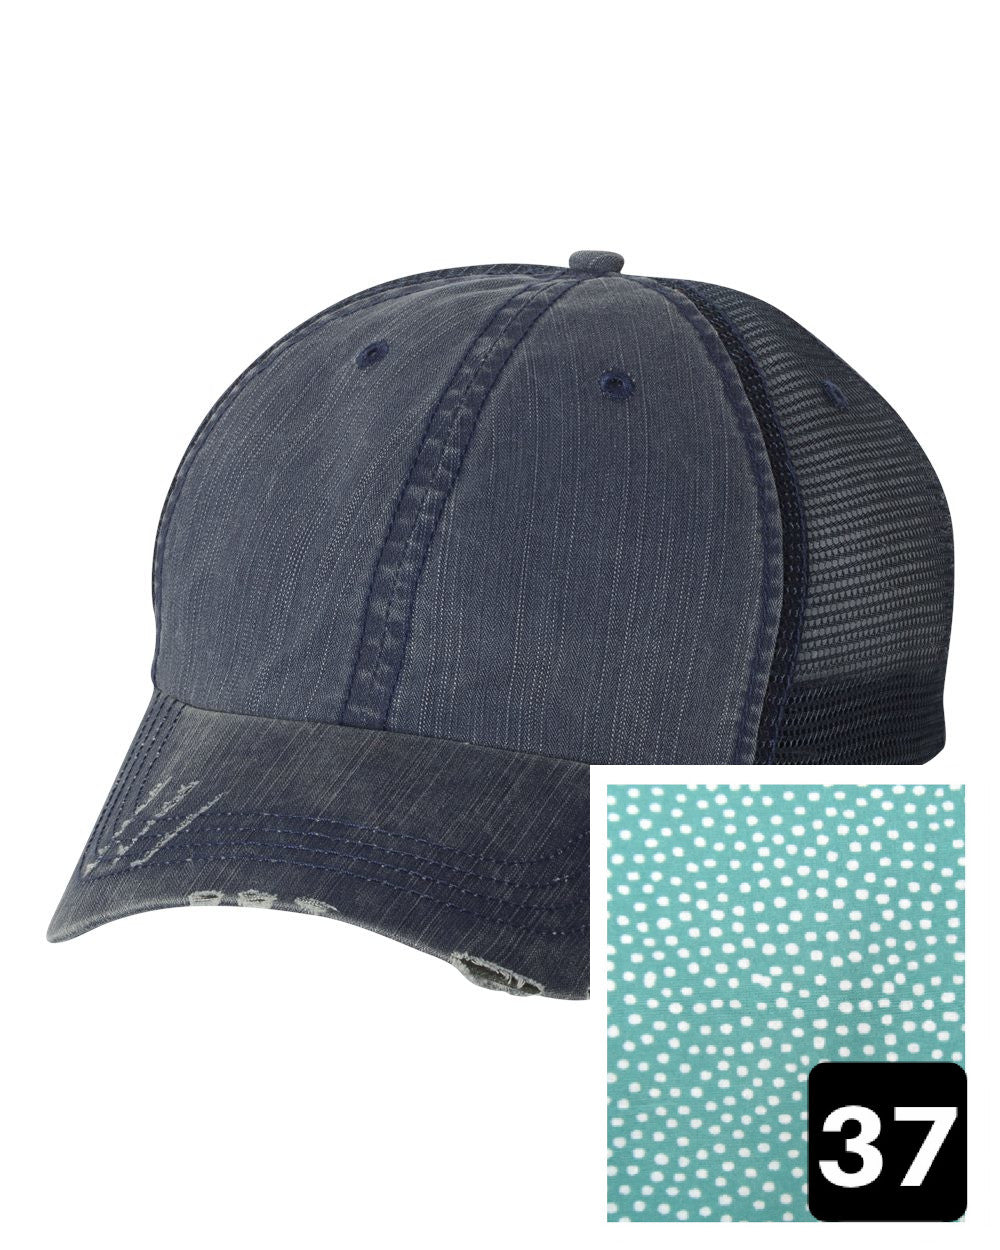 New Mexico Hat | Navy Distressed Trucker Cap | Many Fabric Choices